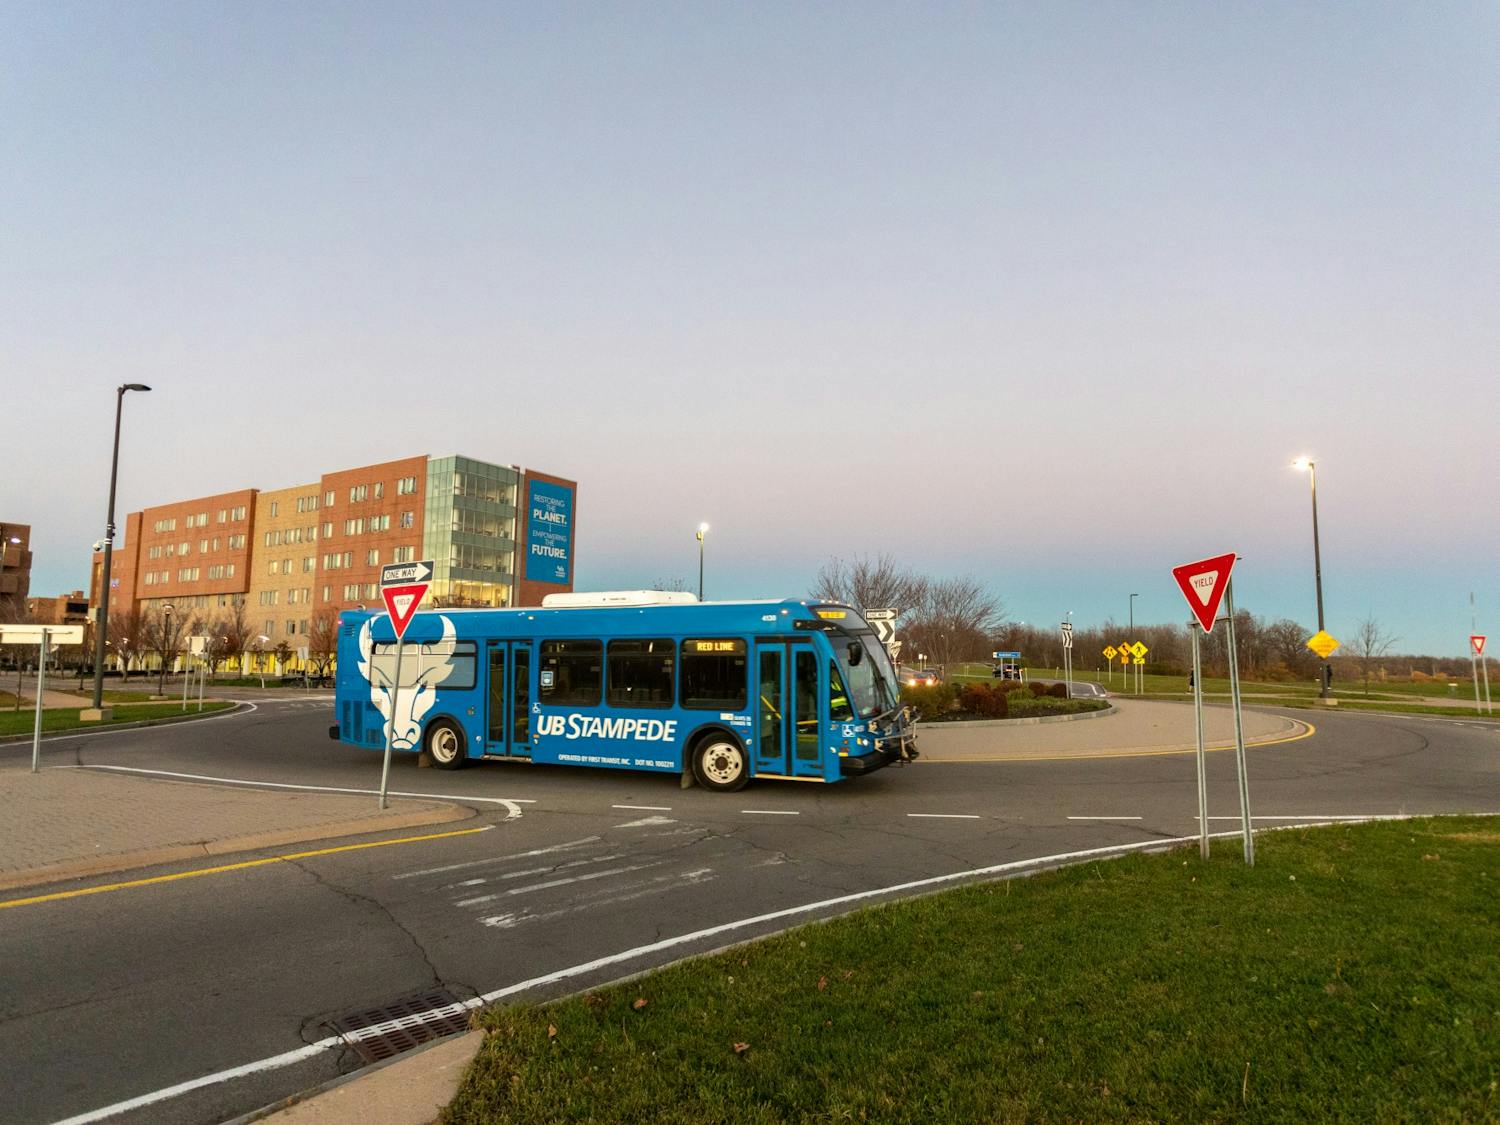 A Stampede bus drives through the roundabout in front of Greiner Hall.